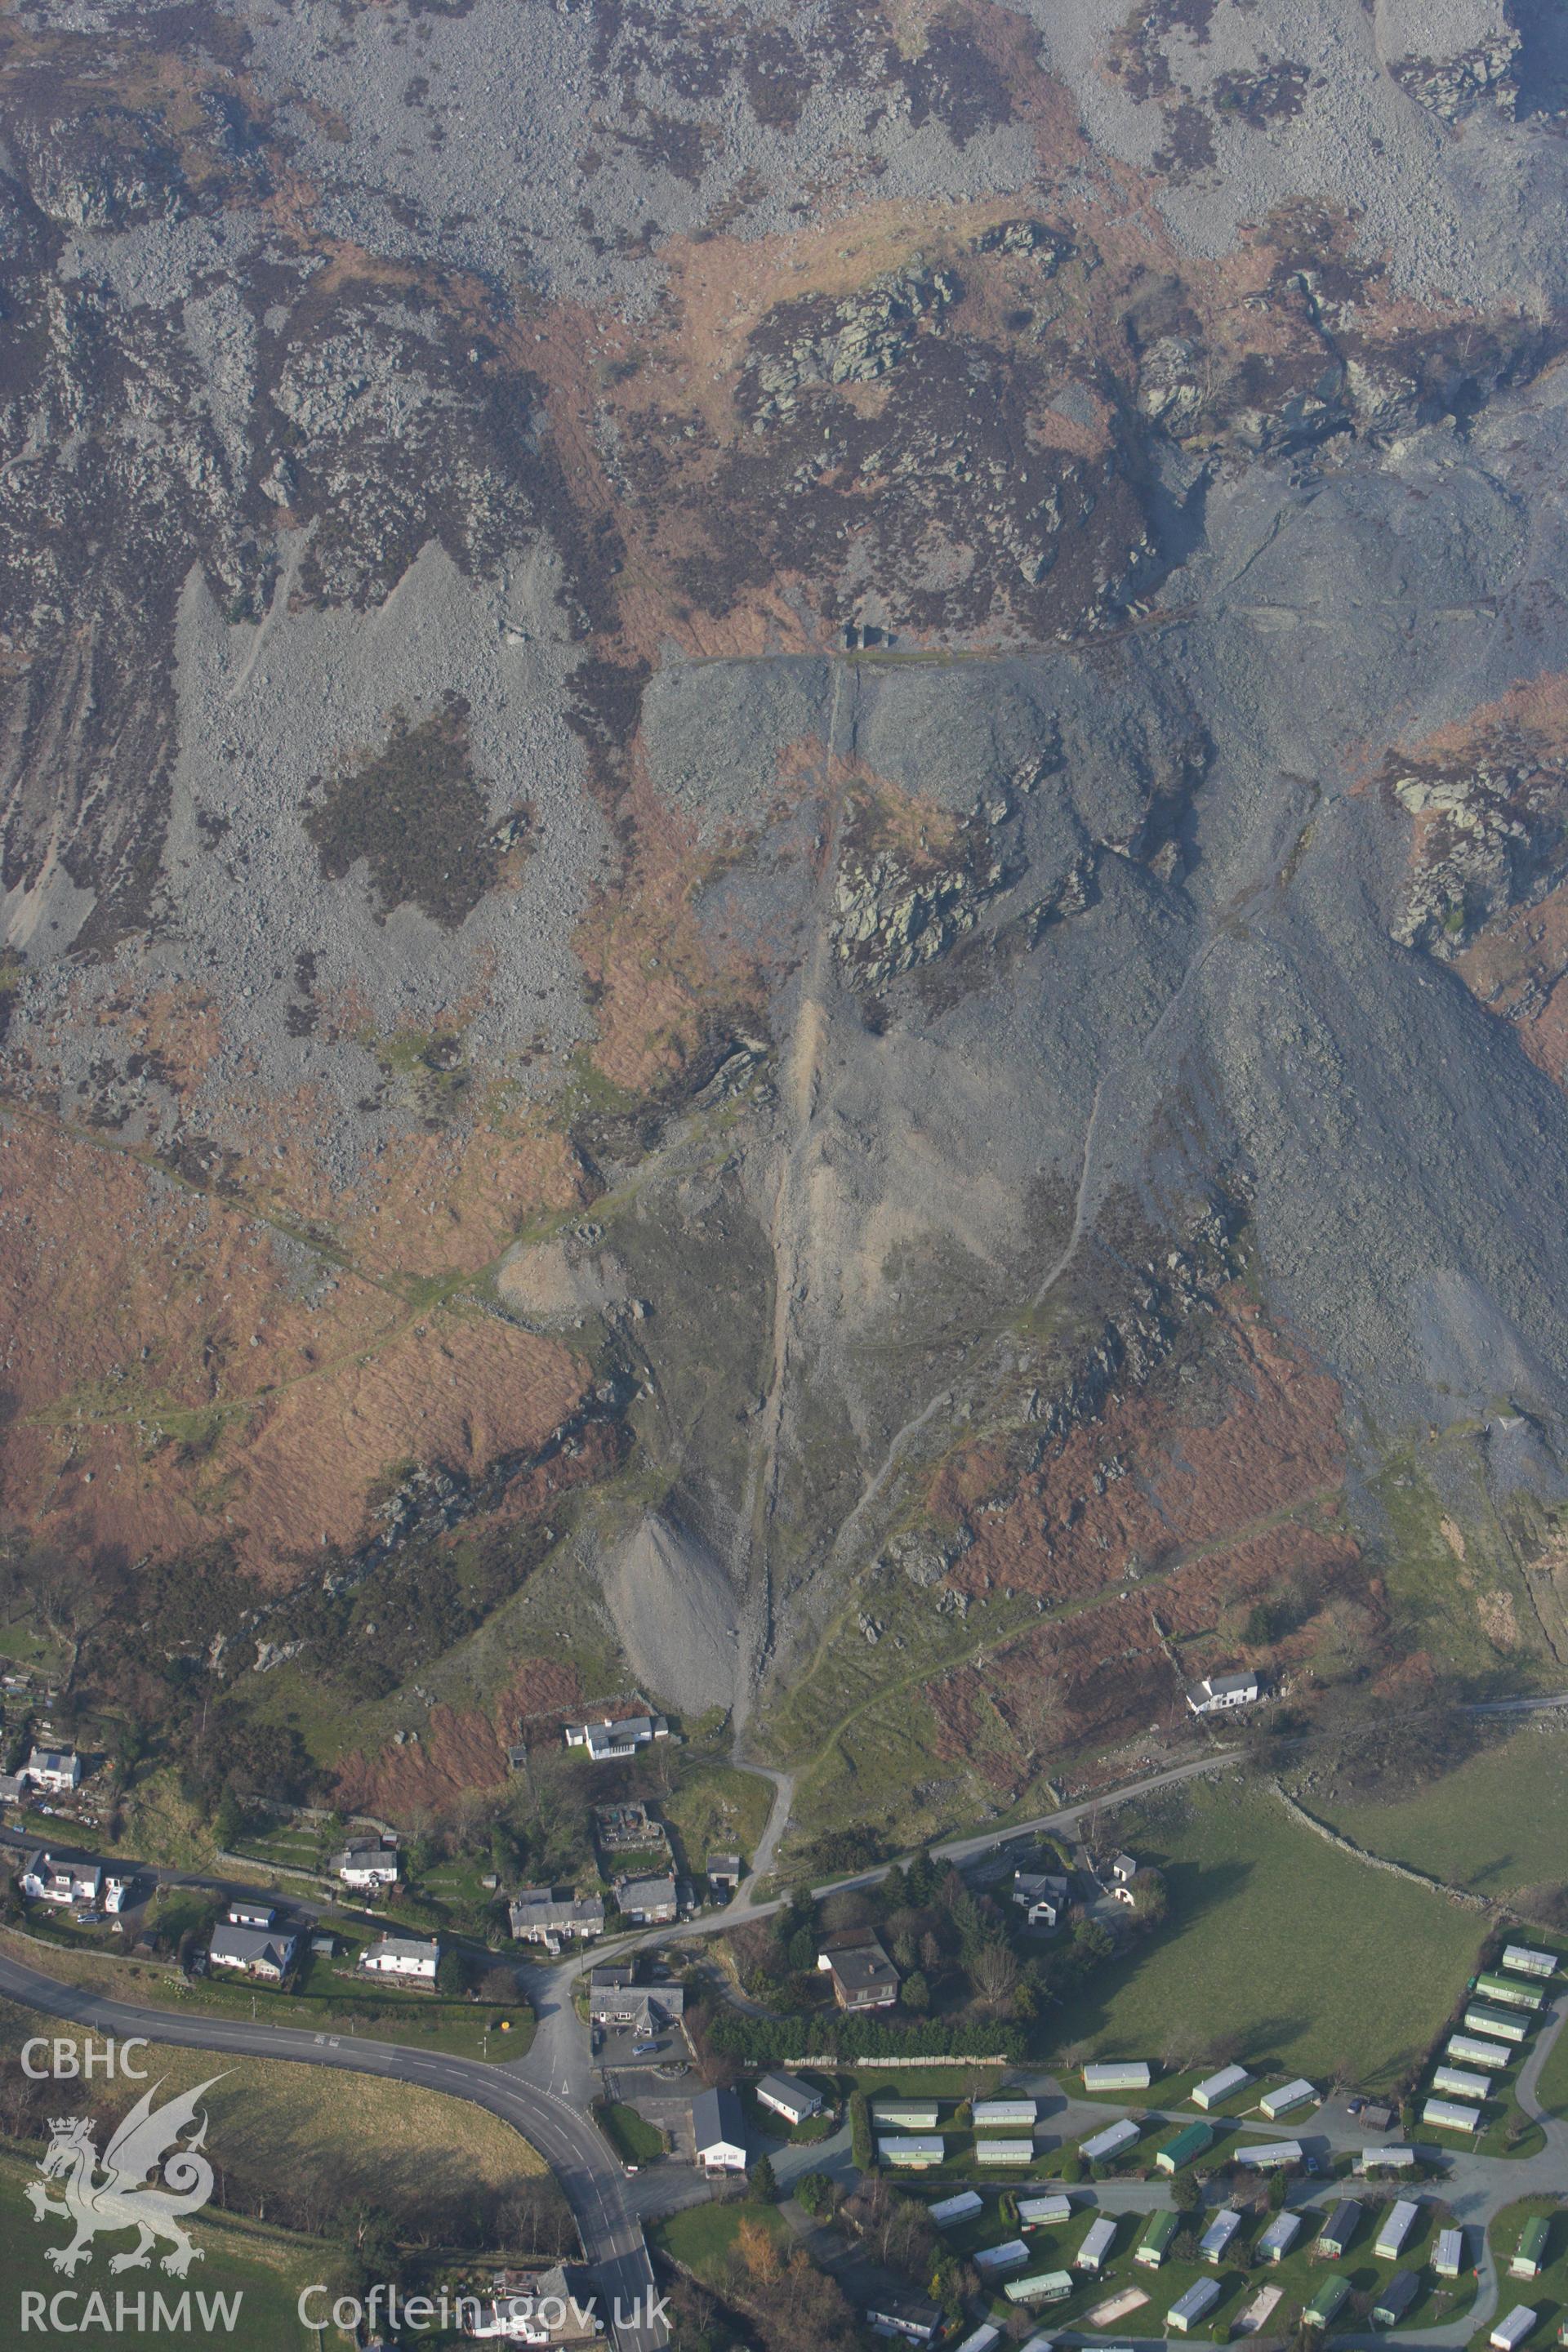 RCAHMW colour oblique photograph of Llangynog, with  Craig Rhiwarth Slate quarry incline. Taken by Toby Driver on 18/03/2009.